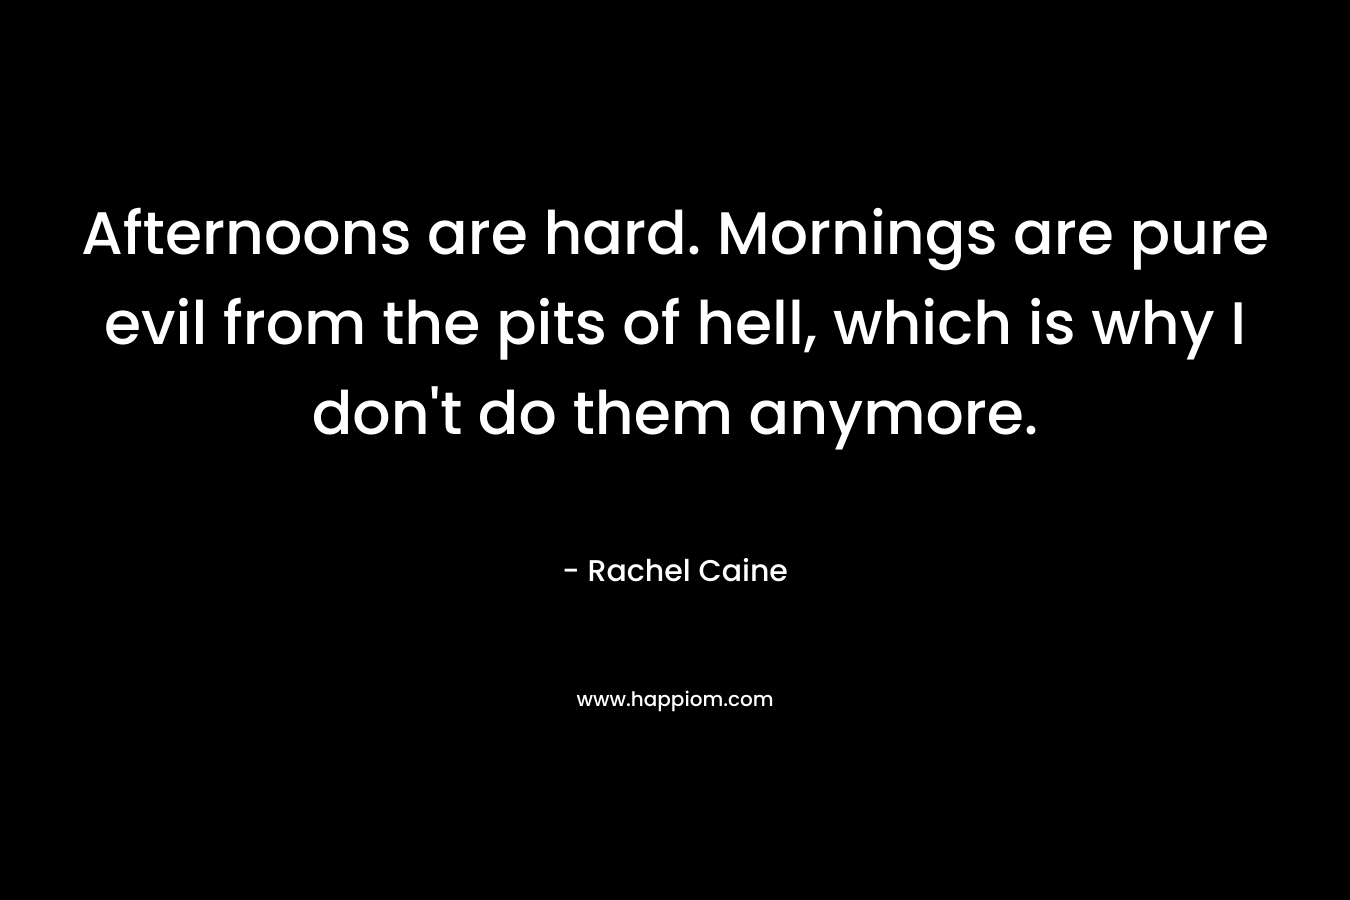 Afternoons are hard. Mornings are pure evil from the pits of hell, which is why I don't do them anymore.